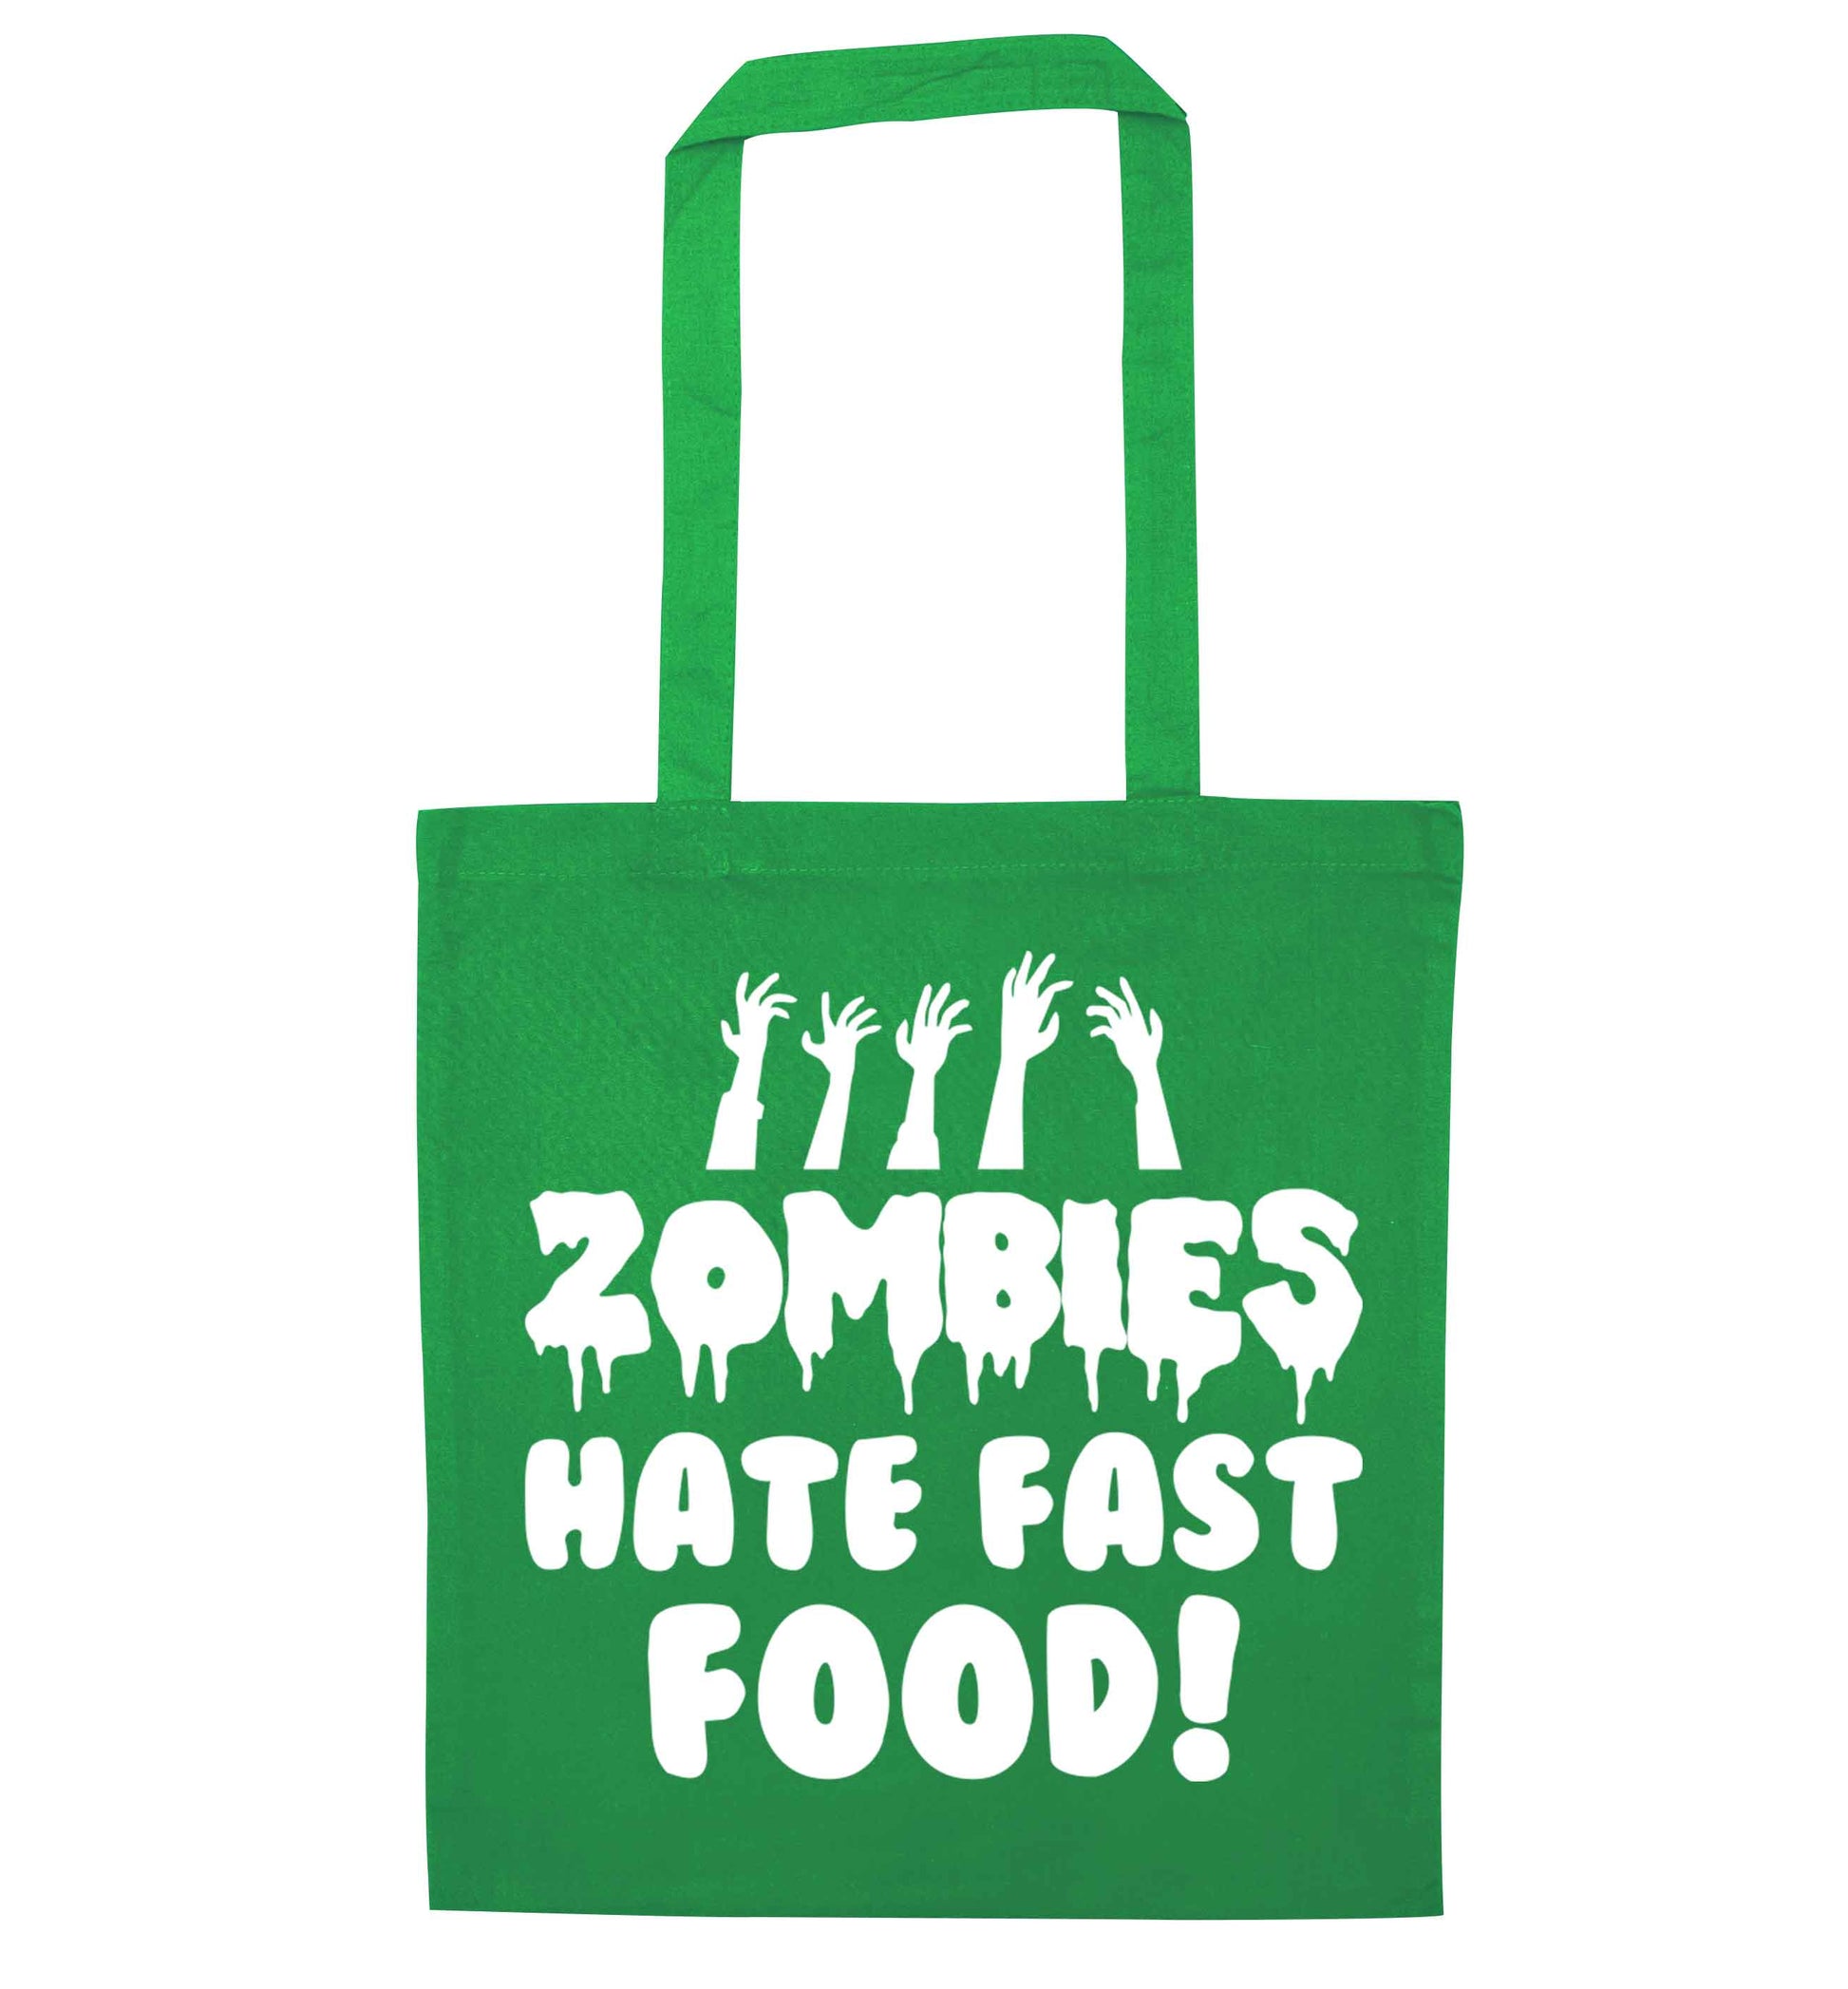 Zombies hate fast food green tote bag